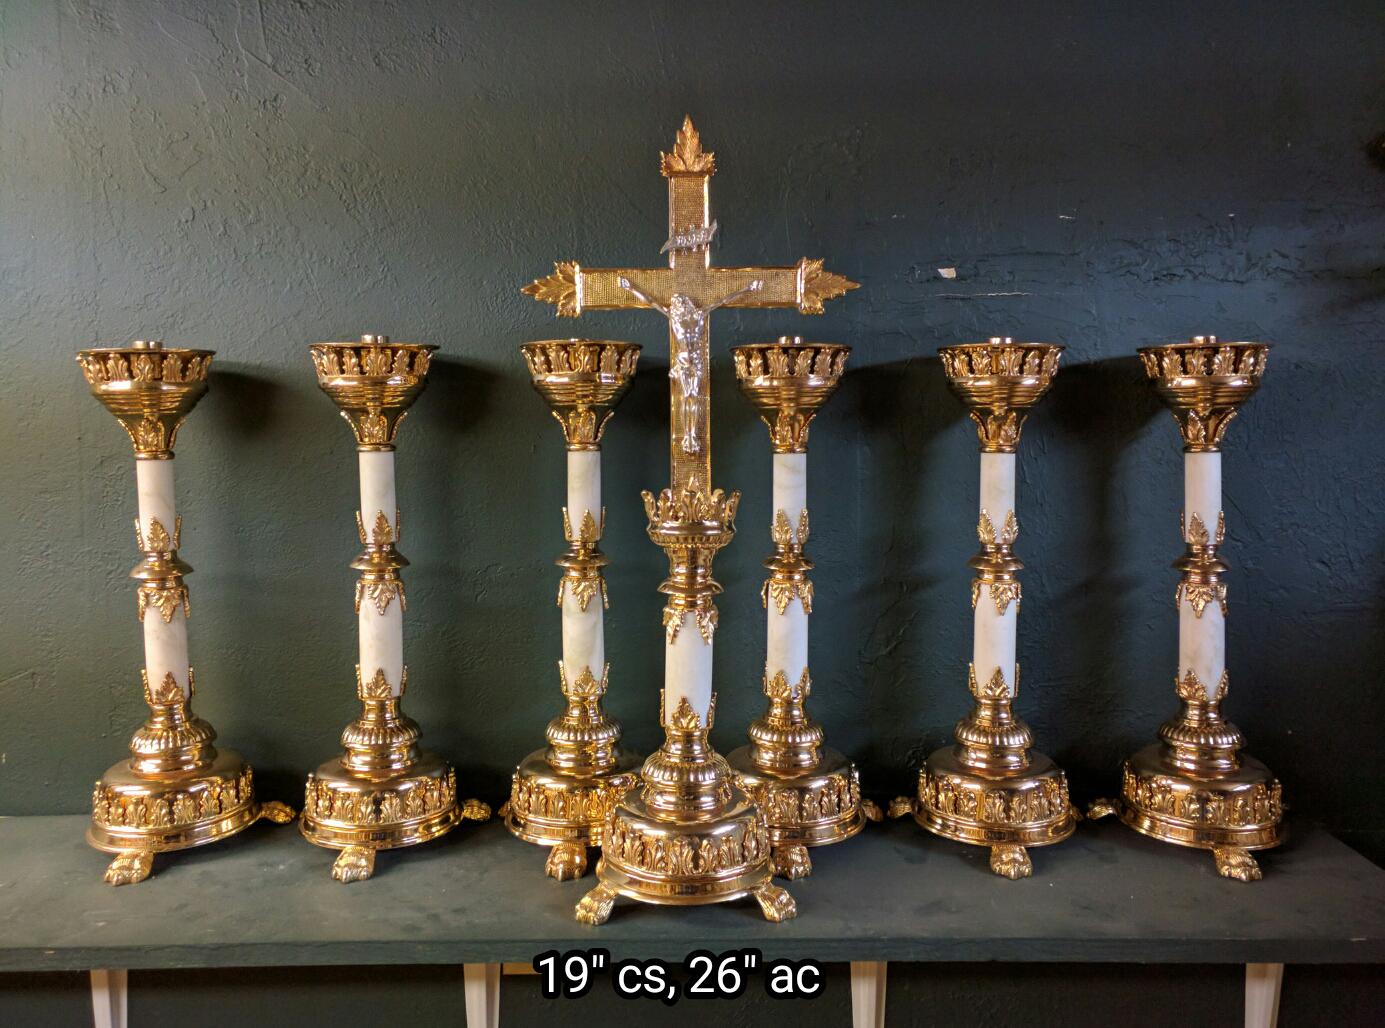 24'' Tall Vintage Brass Church Candle Stick Holders With Cross - a Pair